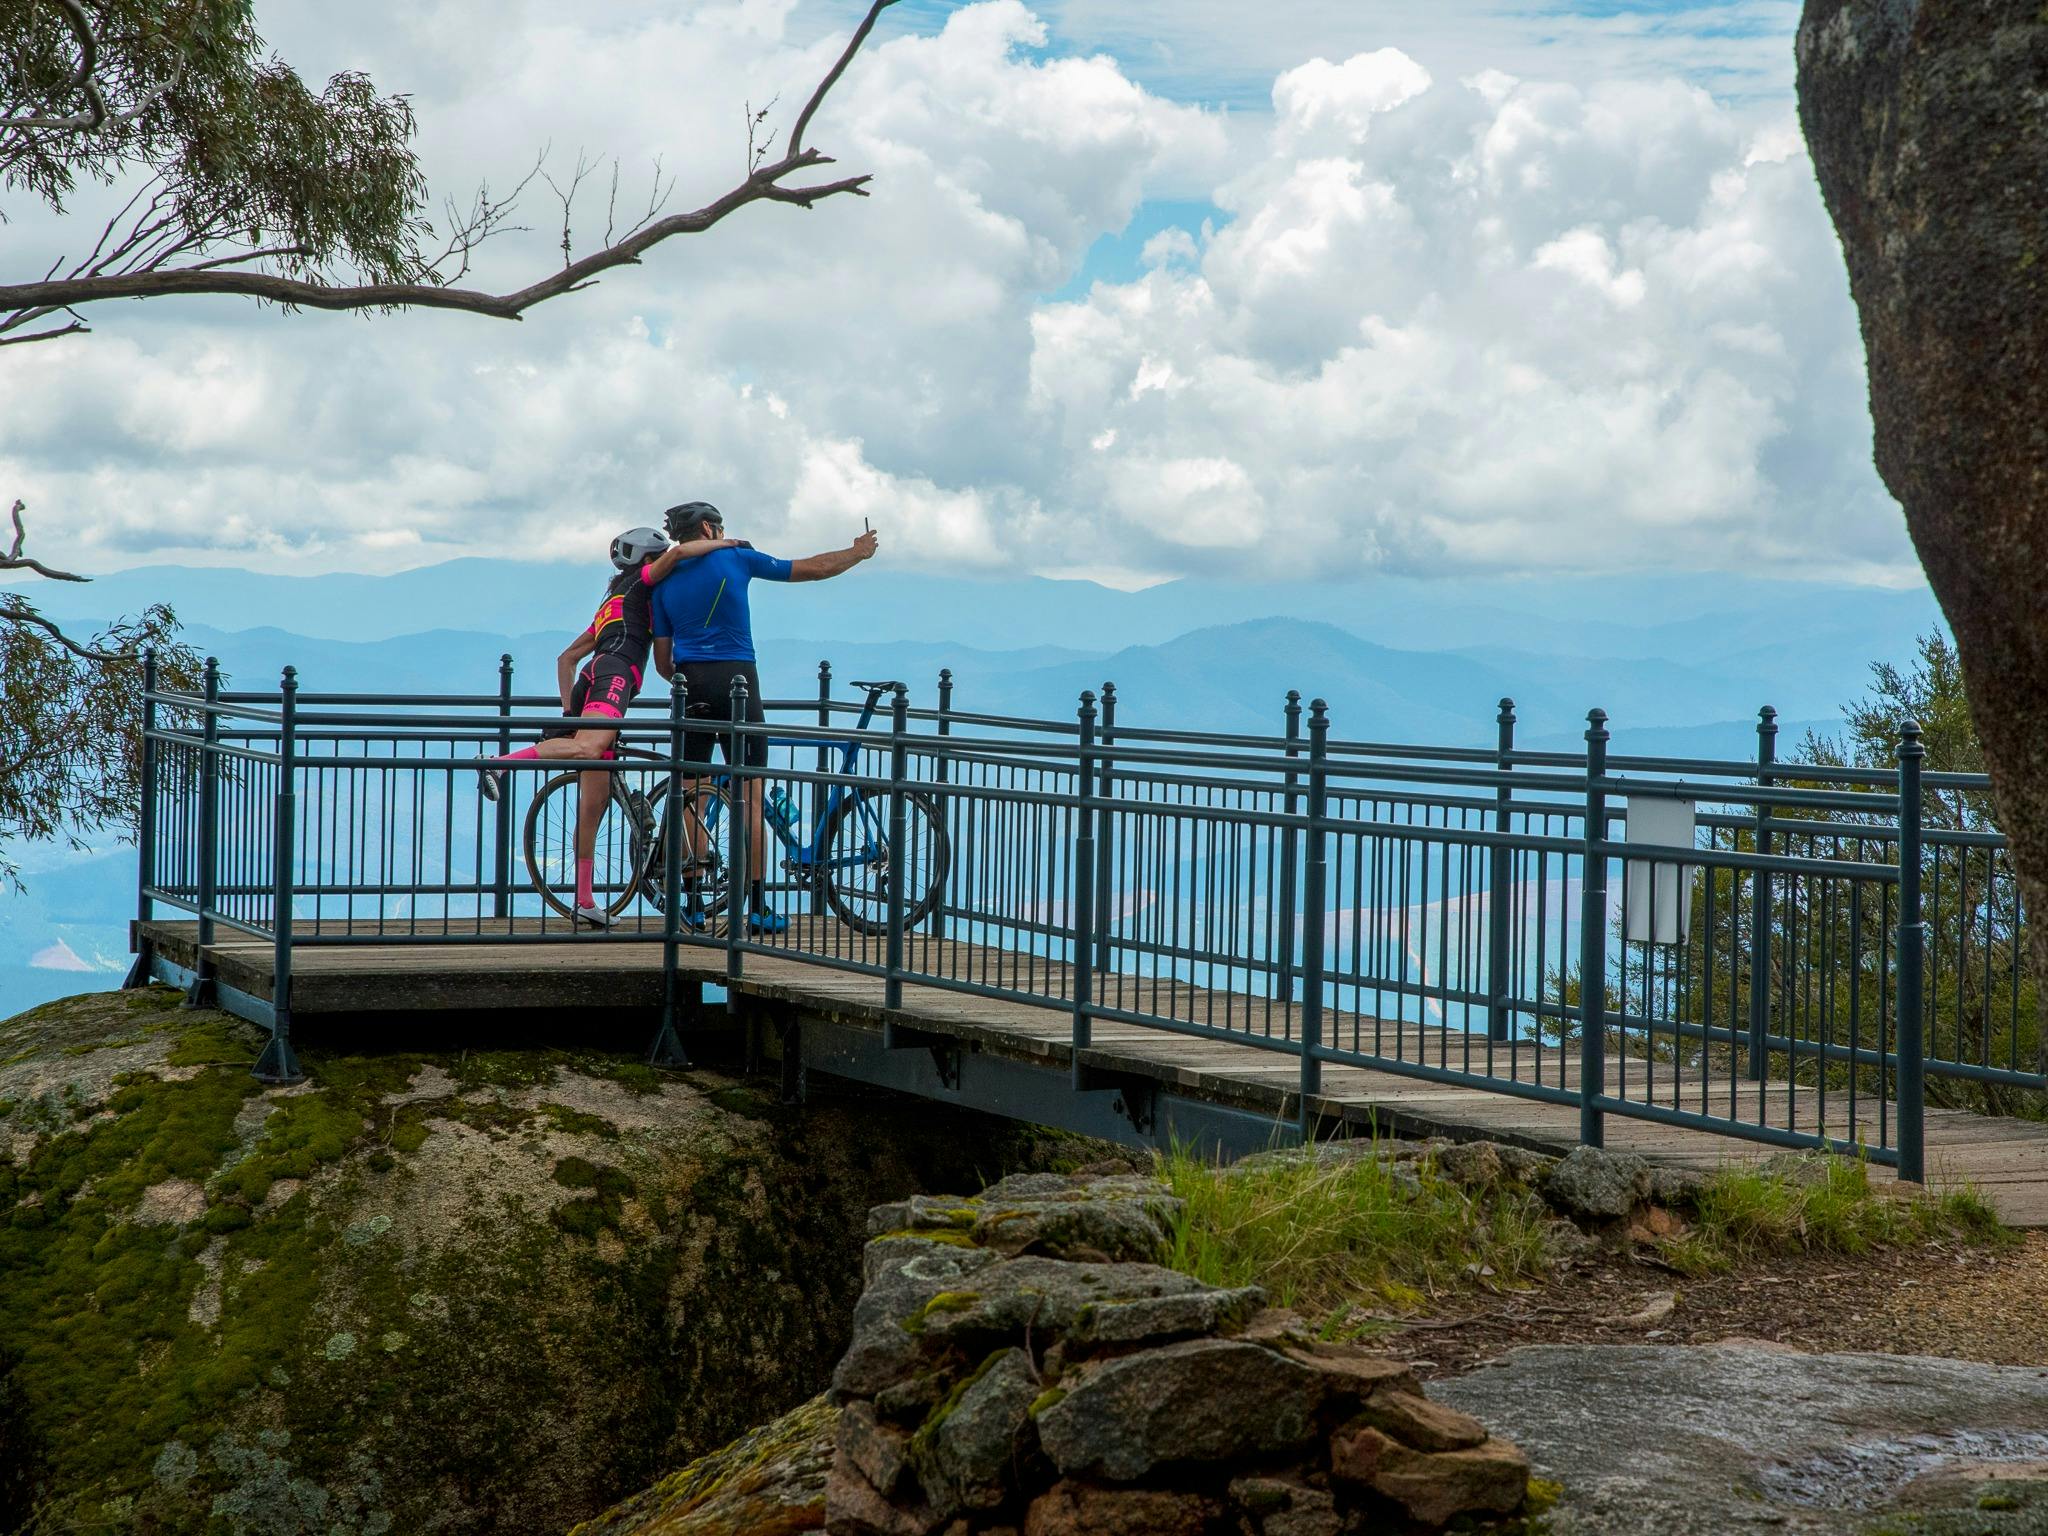 Road cyclists at The Gorge lookout on top of Mount Buffalo